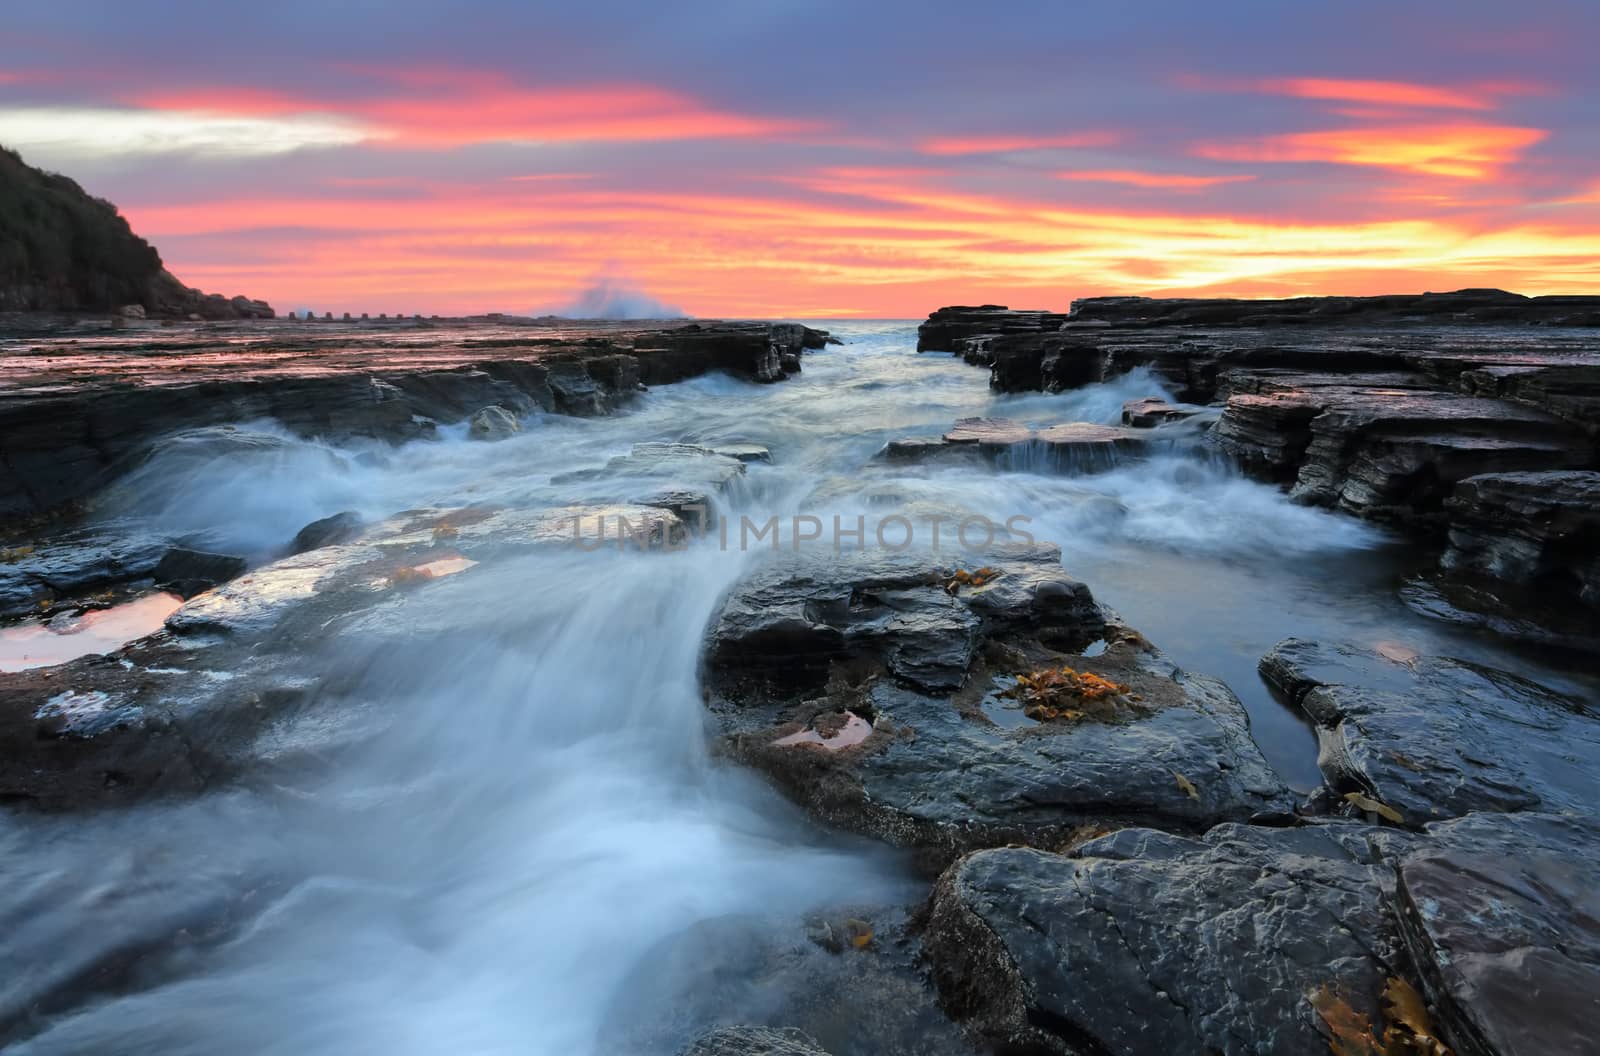  Beautiful sunrise lights up the clouds as waves flow into eroded rock chasm flowing over and around loose rocks